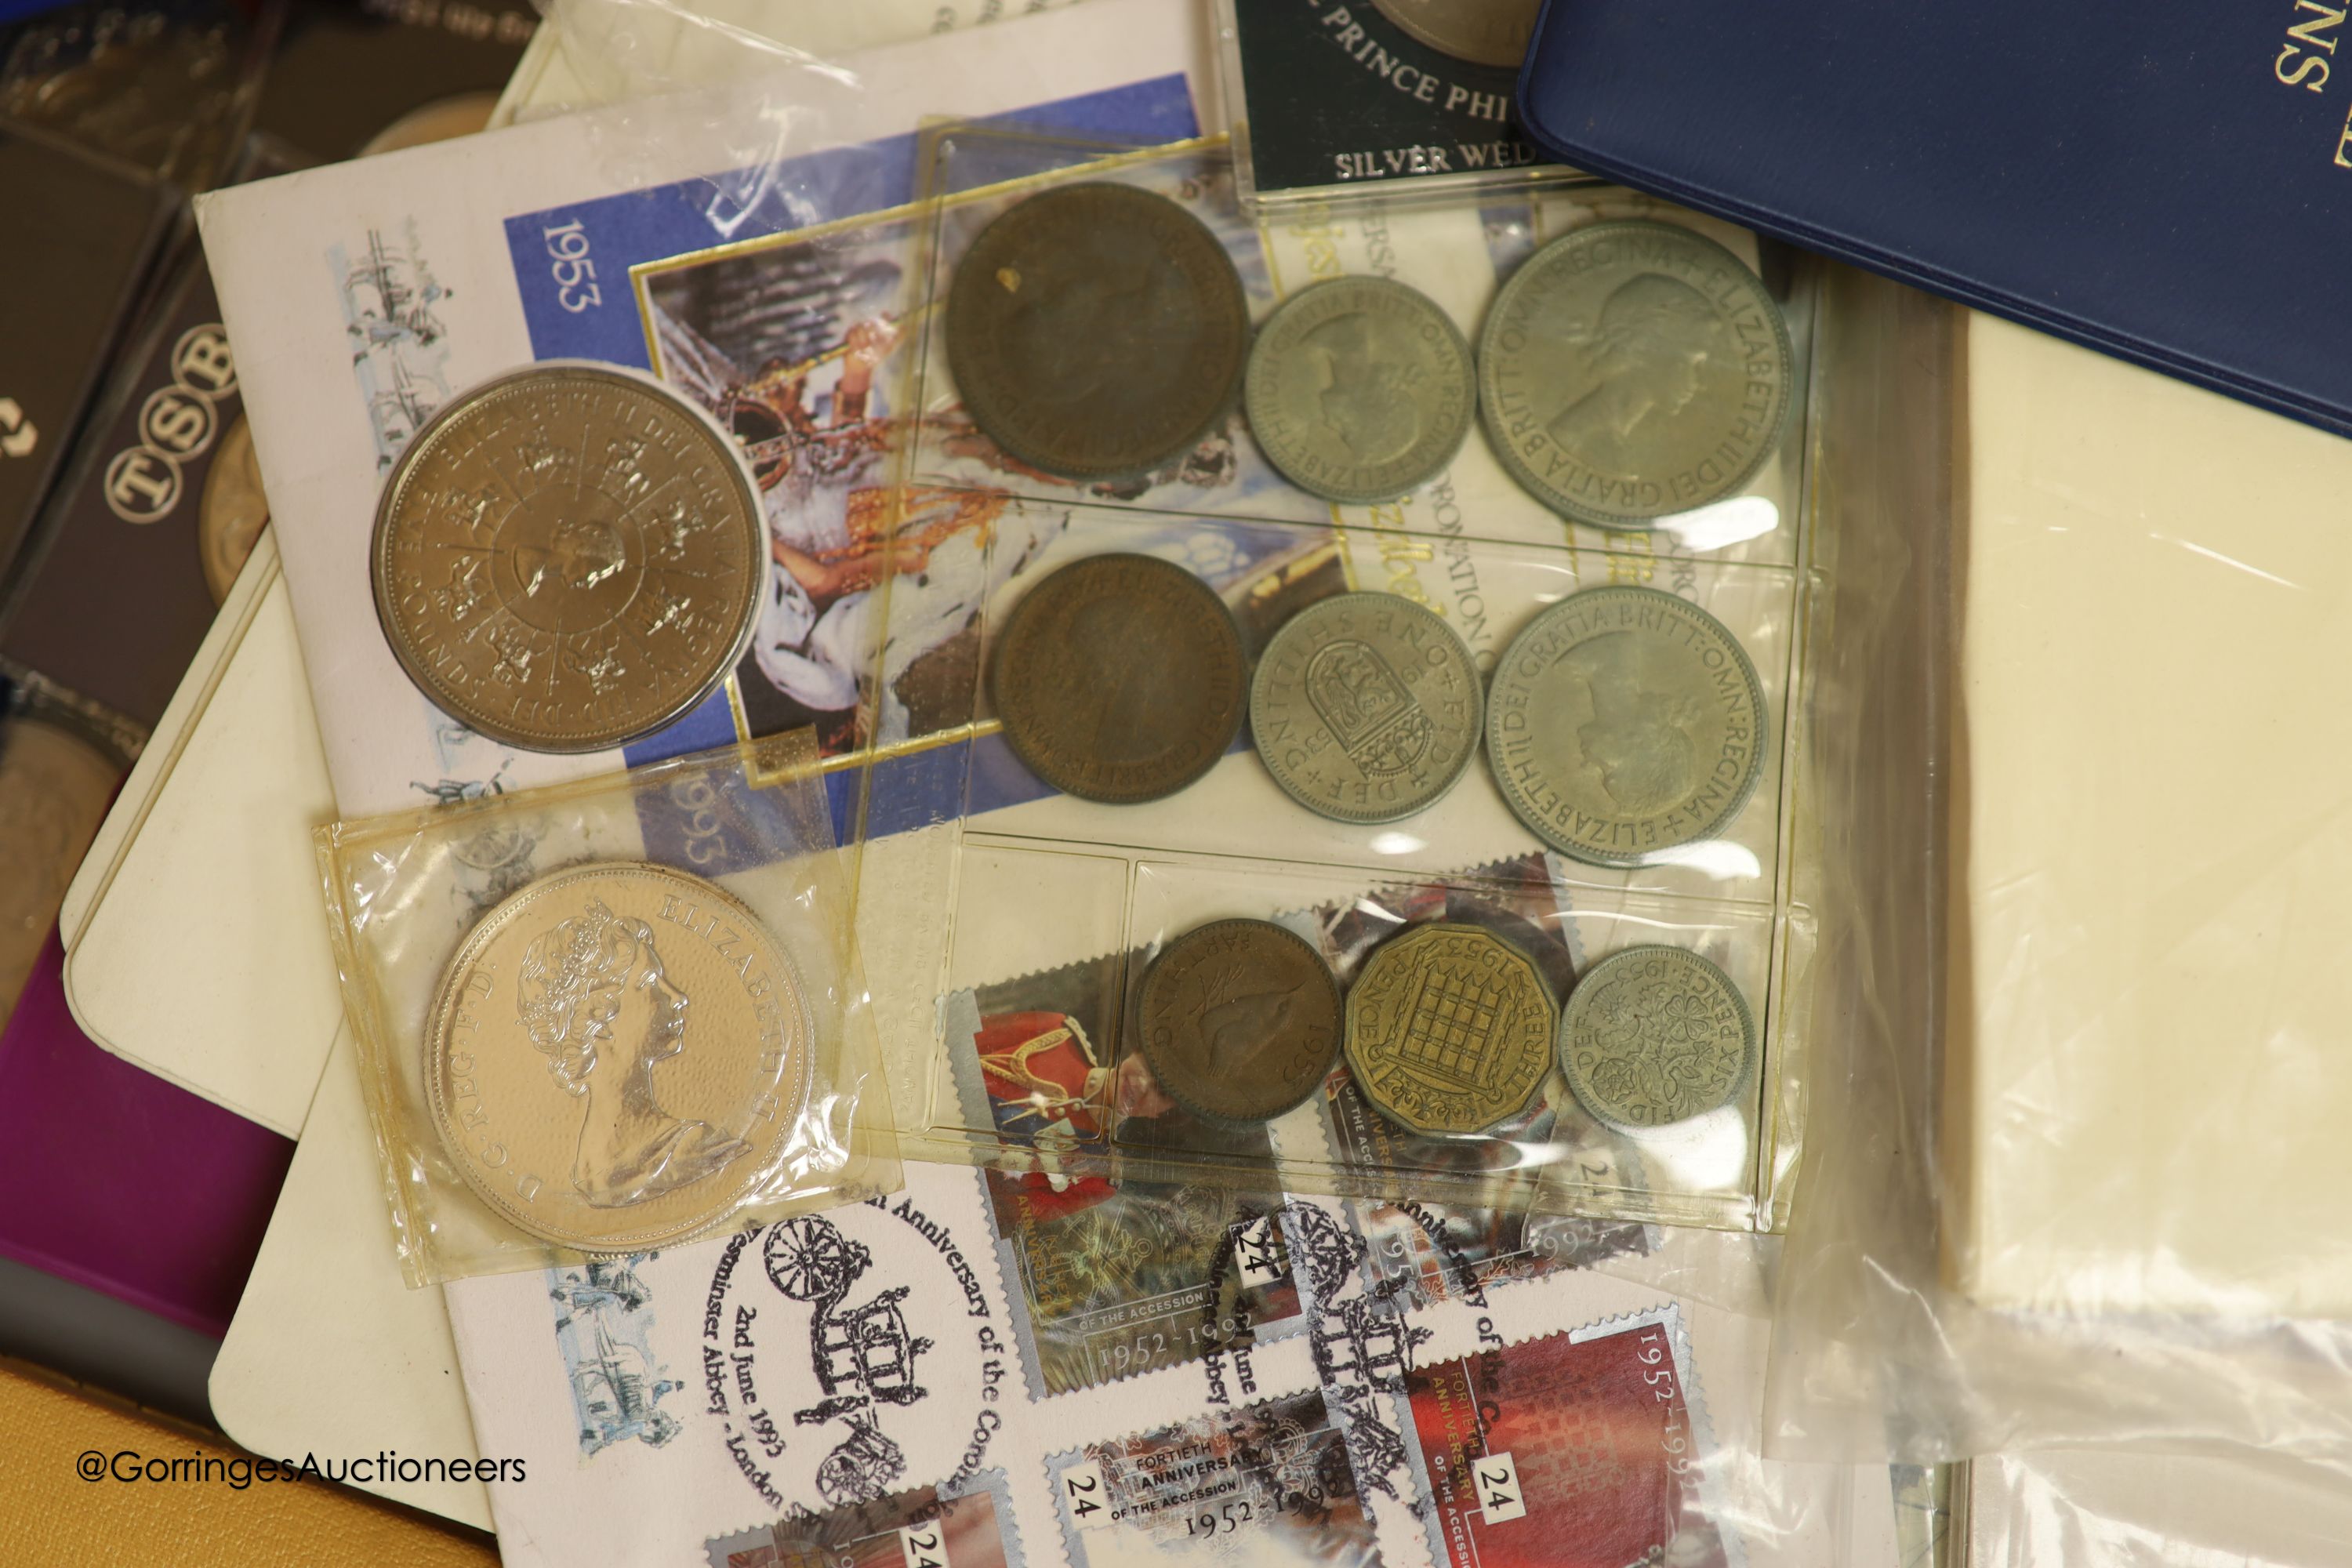 A collection of mostly Royal Mint UK commemorative coins and cover and five UK Brilliant Uncirculated coin collections for 1984 x2, 1986 x2 and 1987.